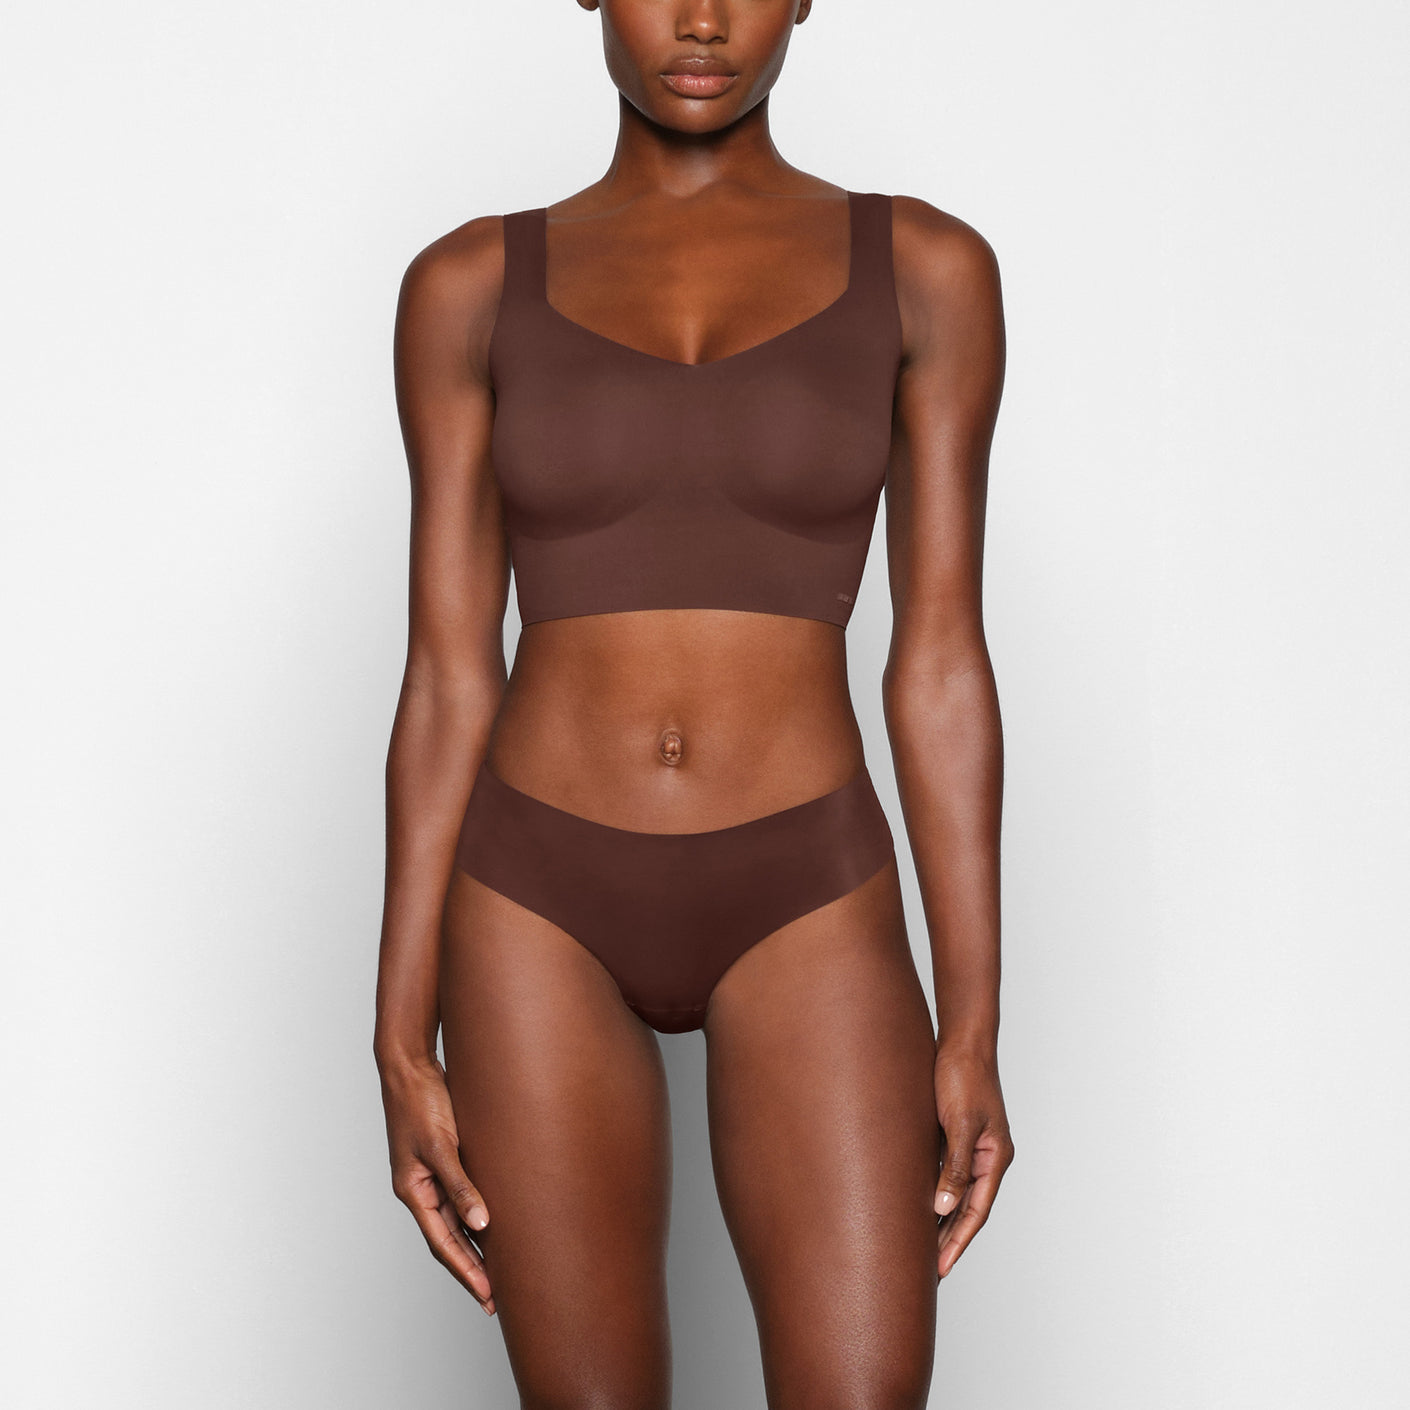 SKIMS DEEP PLUNGE SHAPEWEAR BRA in cocoa size medium - $49 New With Tags -  From Marissa